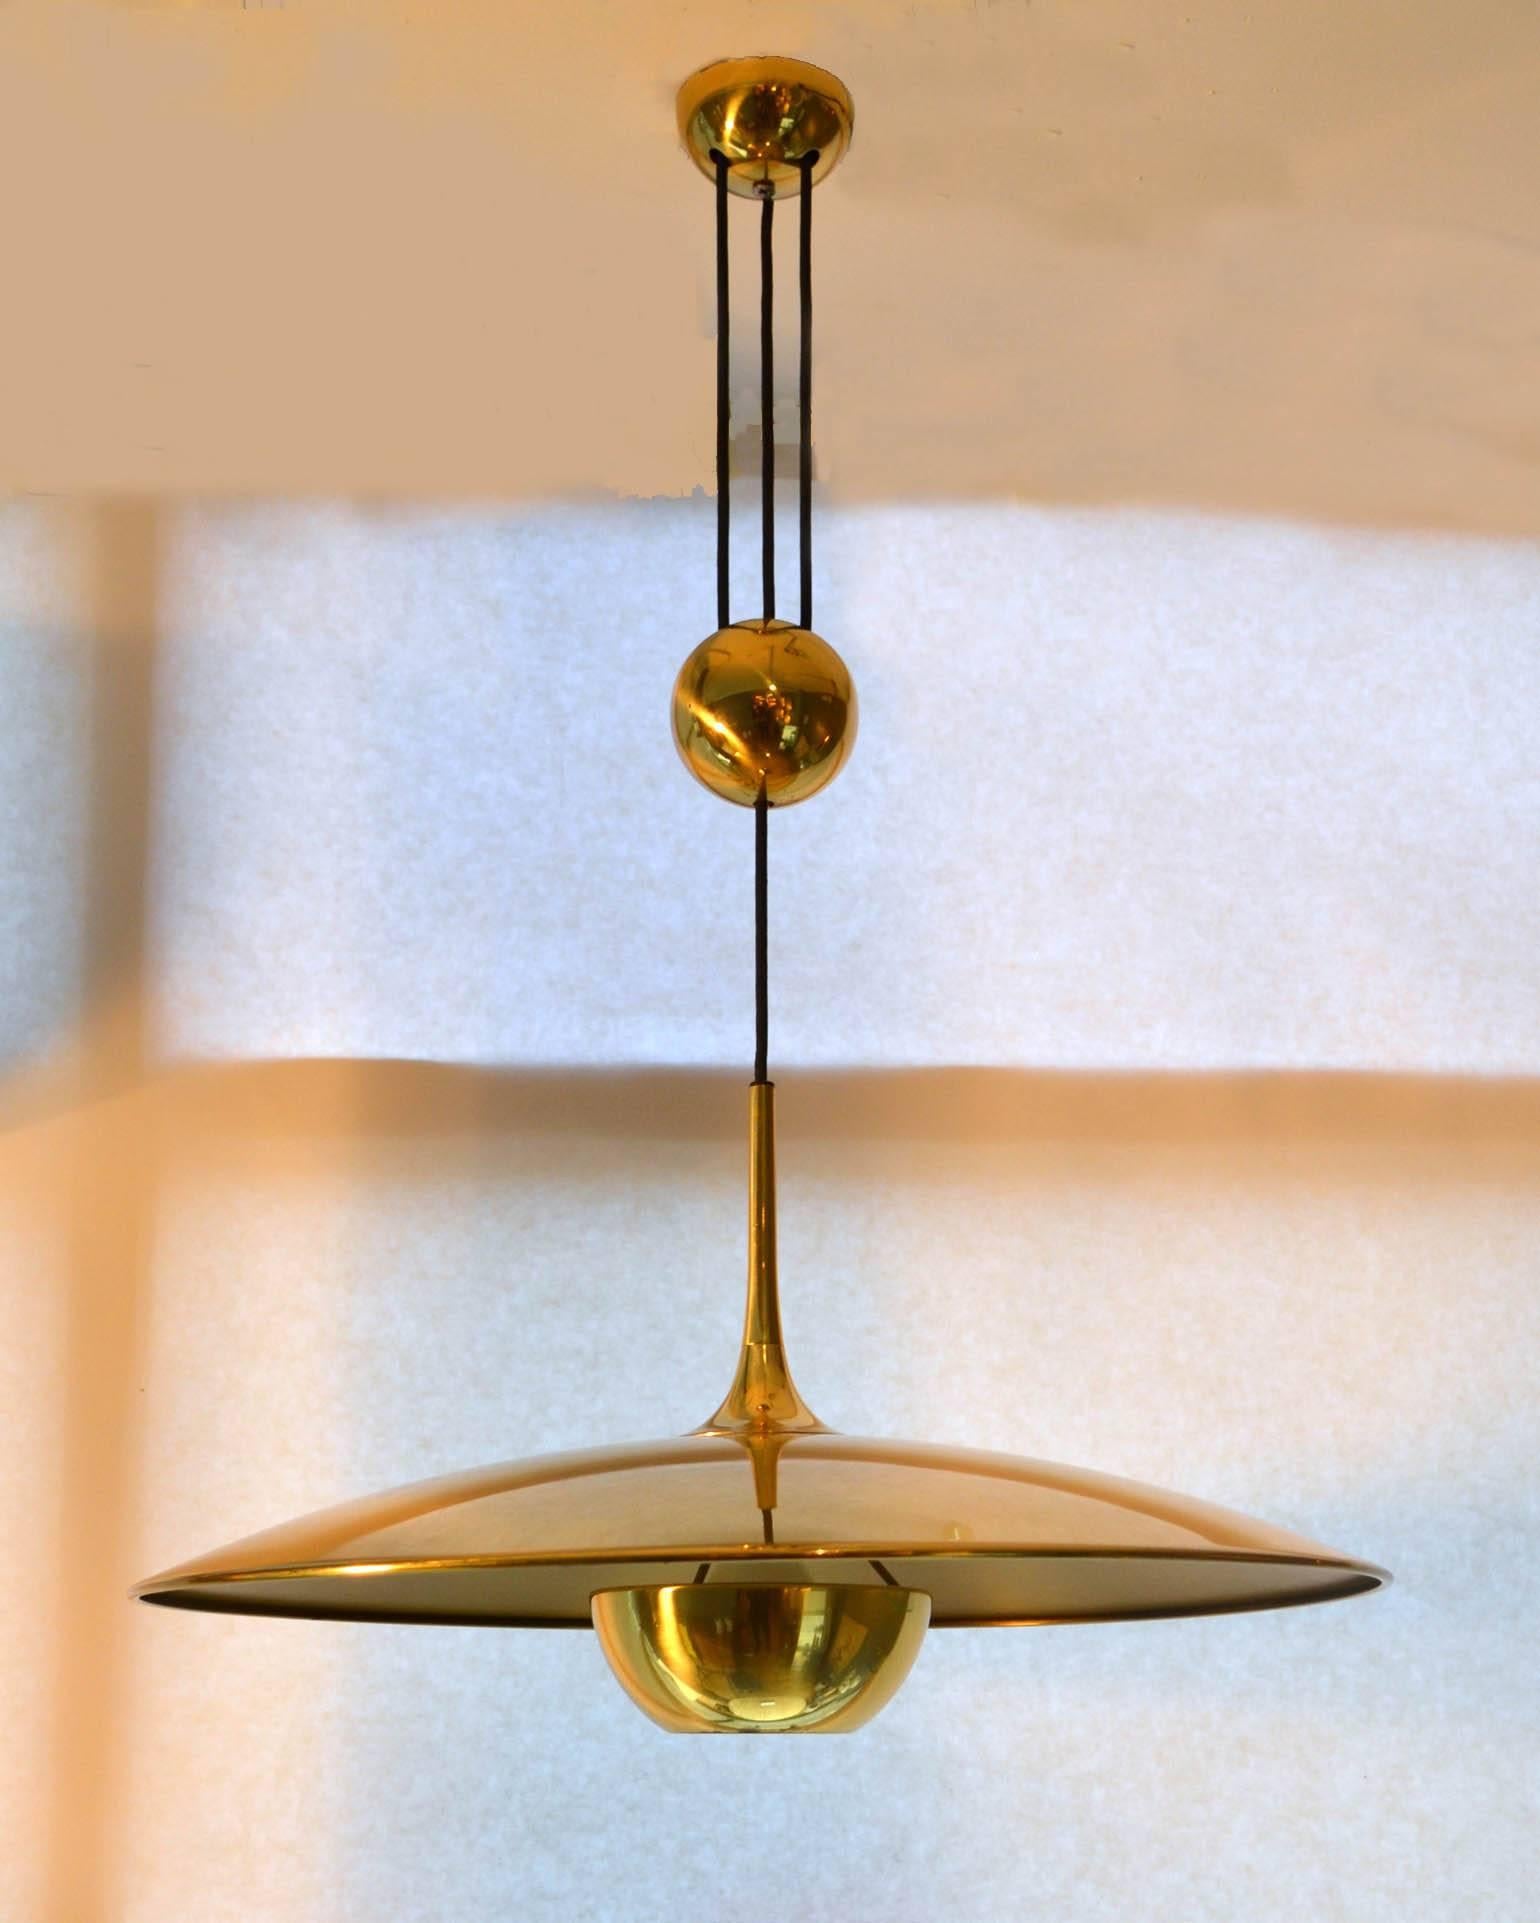 Early counterbalance pendant Onos 55 by Florian Schulz. This elegant and minimal pendant in a high quality brass moves smoothly up and down due to the solid brass counterweight. The shade was a brass diffuser. 
Excellent timeless design of a very